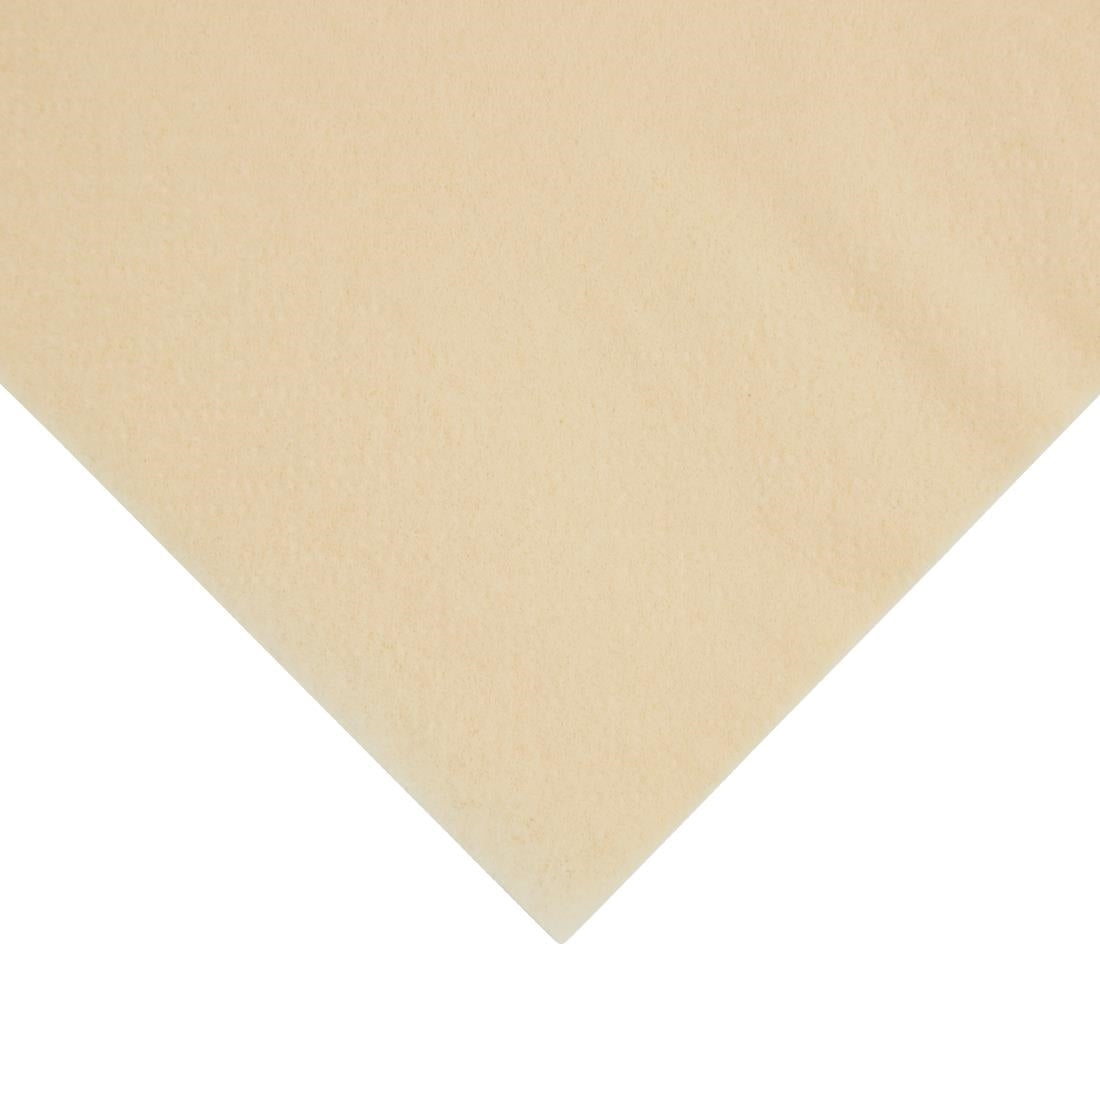 FE220 Fiesta Recyclable Lunch Napkin Cream 33x33cm 2ply 1/4 Fold (Pack of 2000) JD Catering Equipment Solutions Ltd